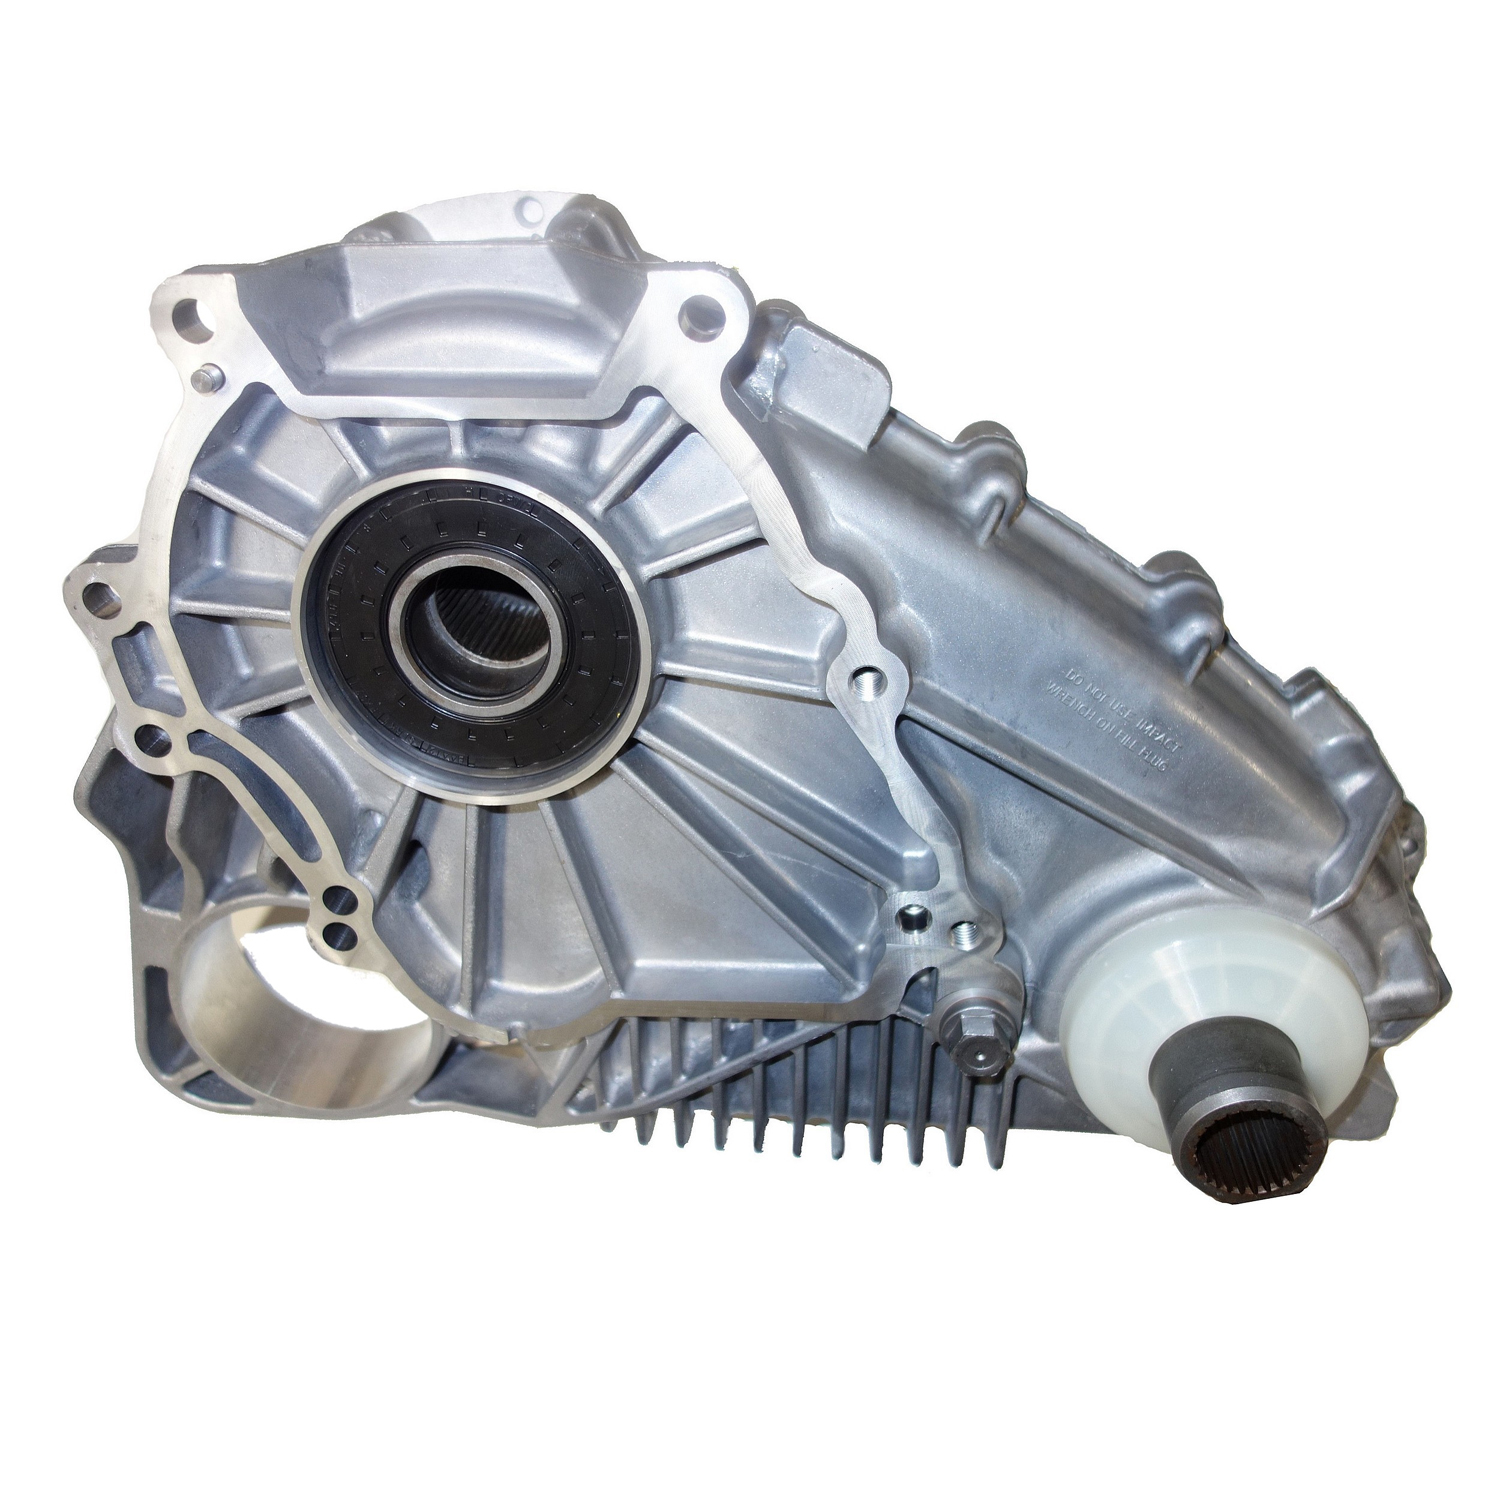 Remanufactured ATC500 Transfer Case for BMW 04-06 X5